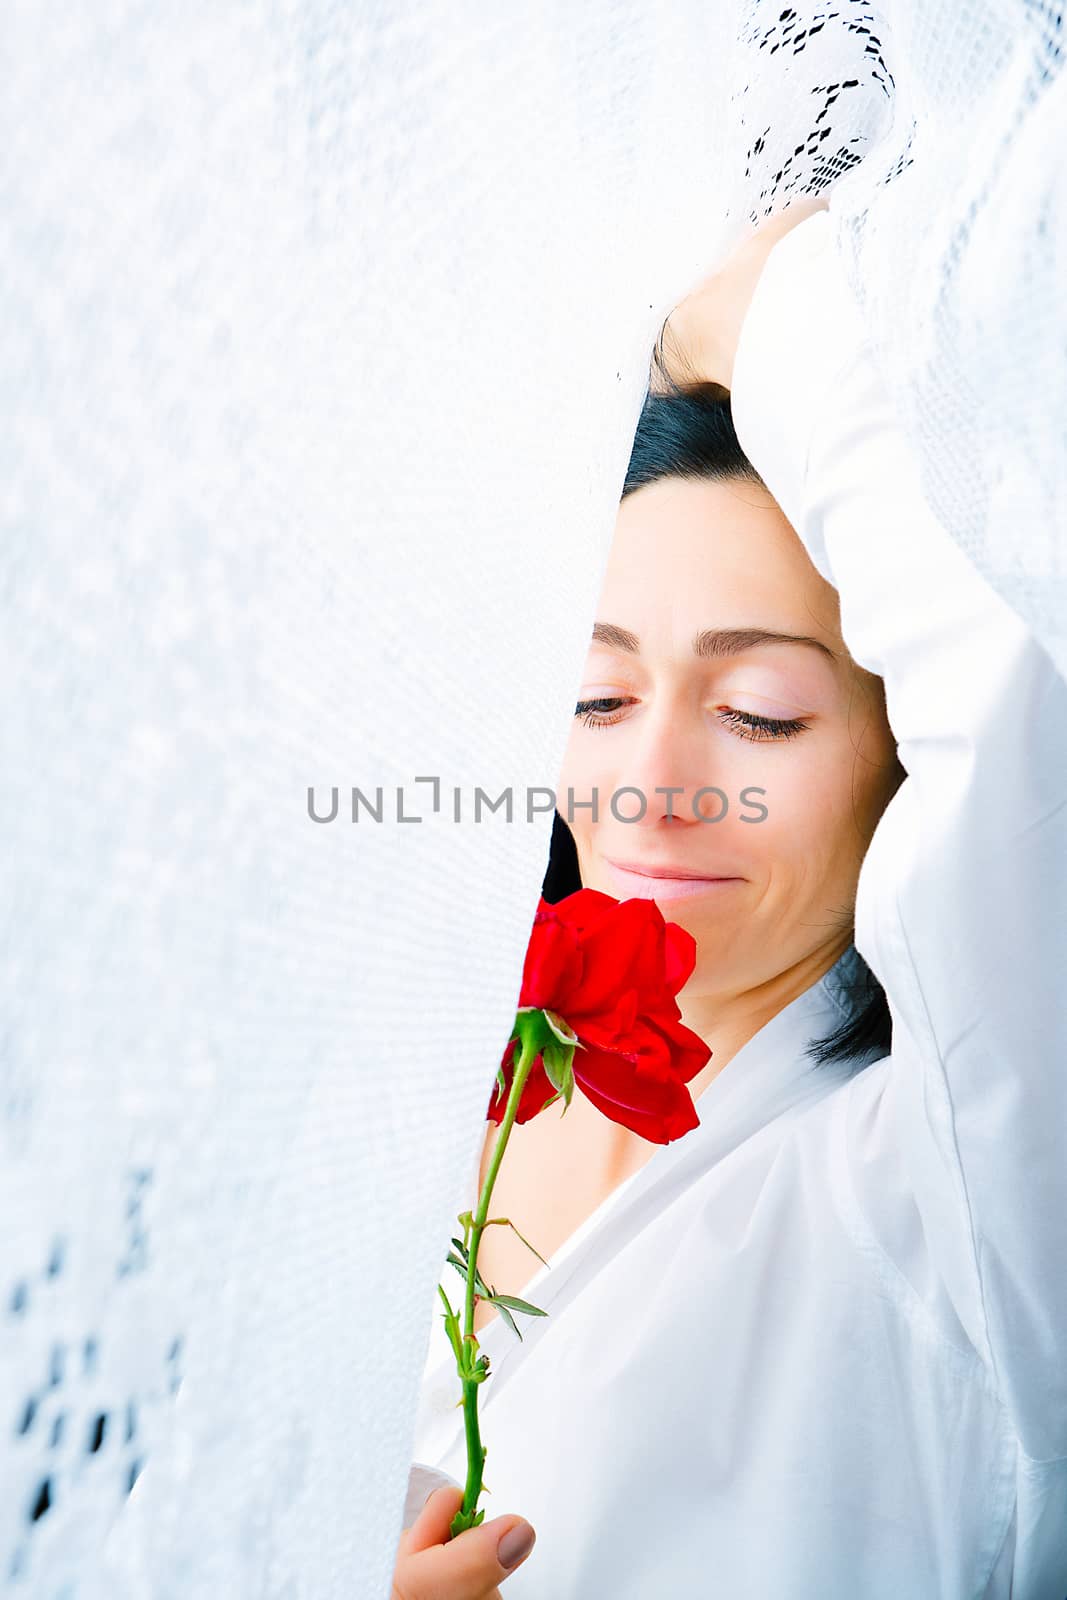 portrait of a young woman with a red rose in her hands surrounded by lace white curtains, waking up in the early morning